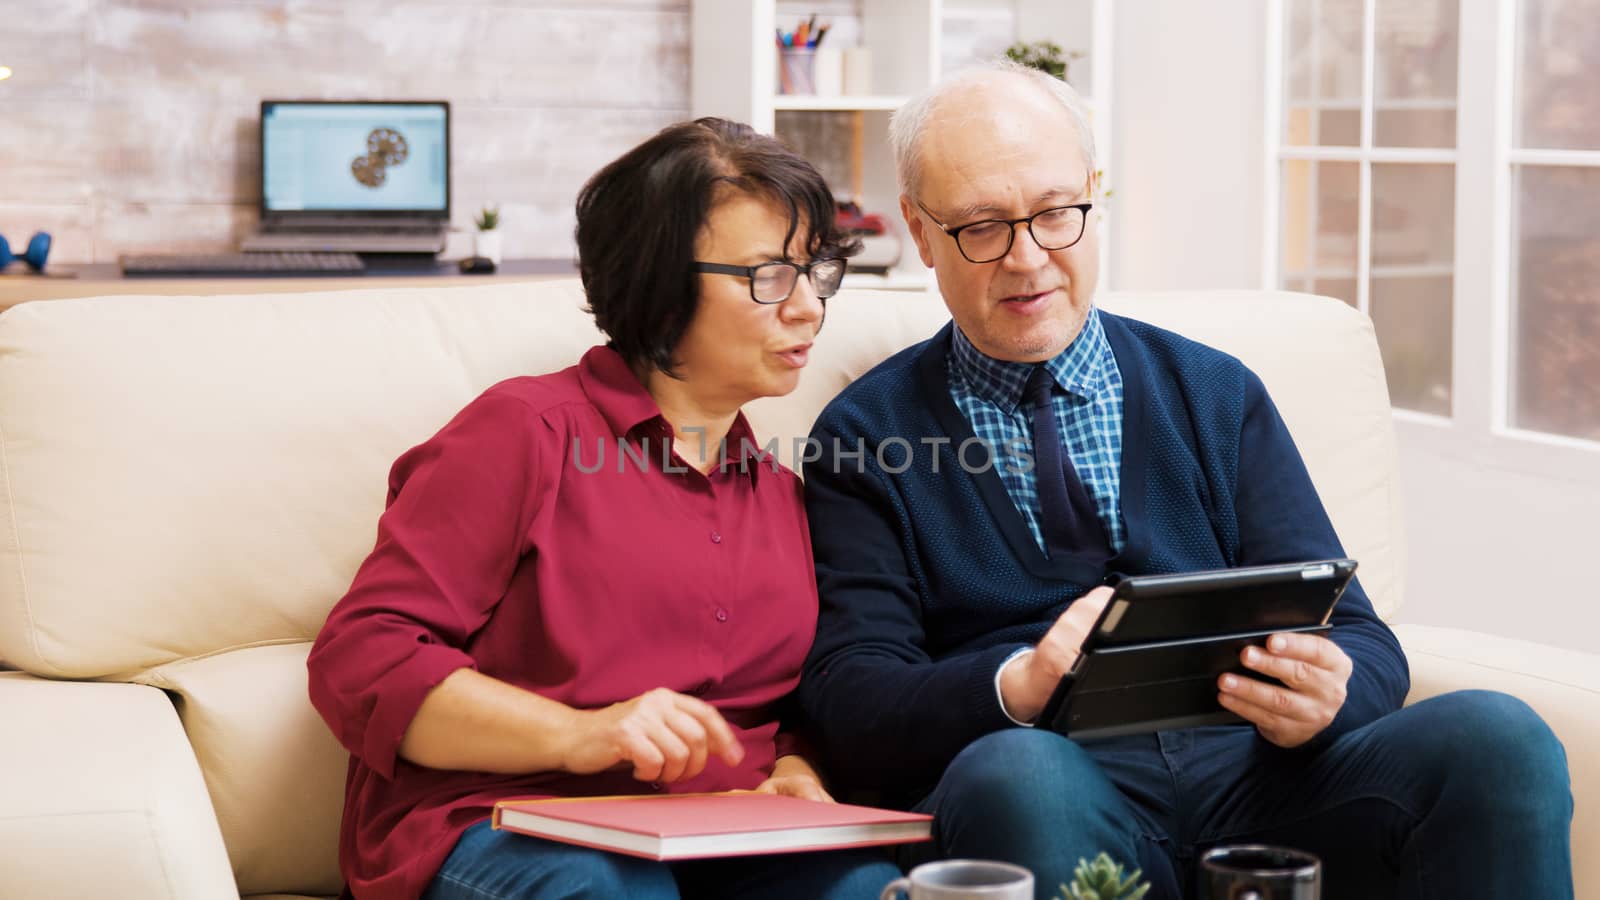 Elderly age couple using tablet while sitting on sofa in living room. Elderly age woman enjoying a cup of coffee.